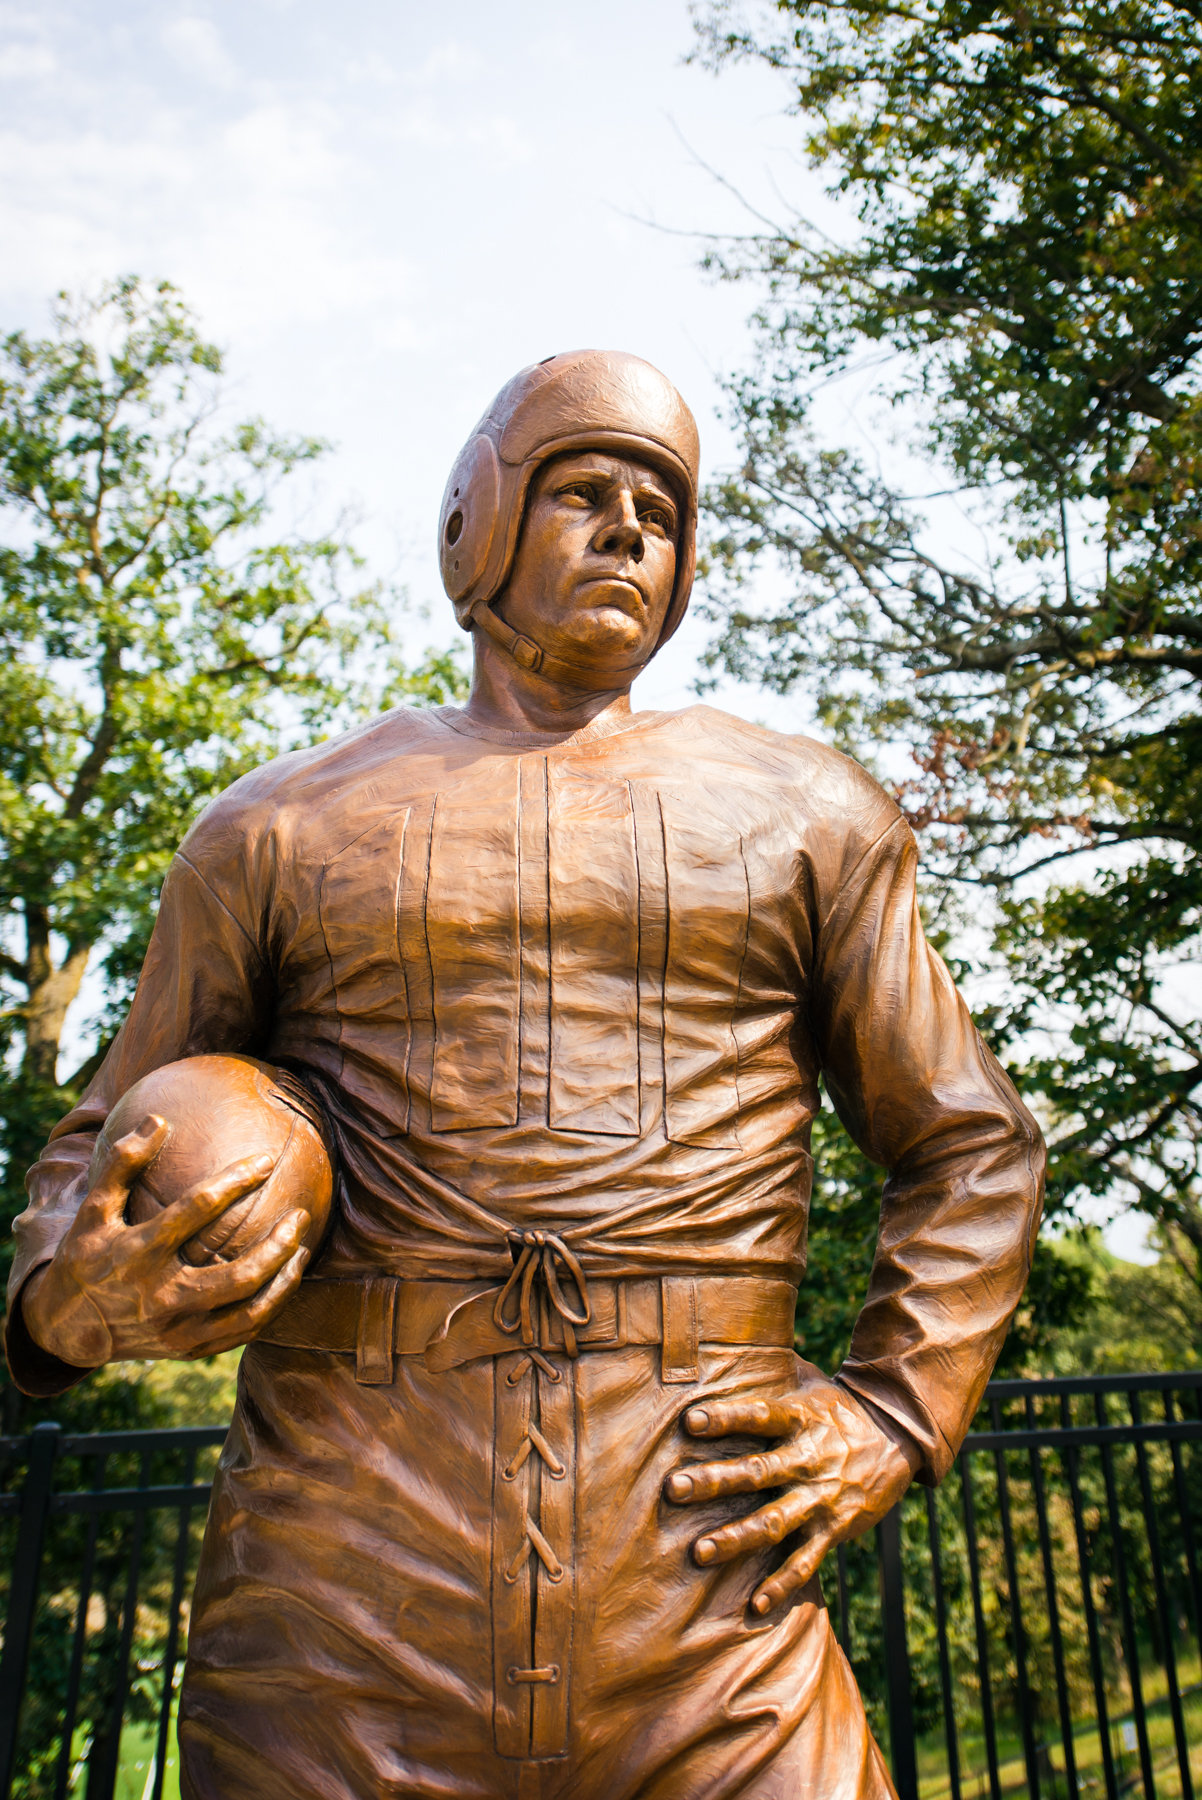 This is The Victor, a statue located outside of the Oak Bowl.